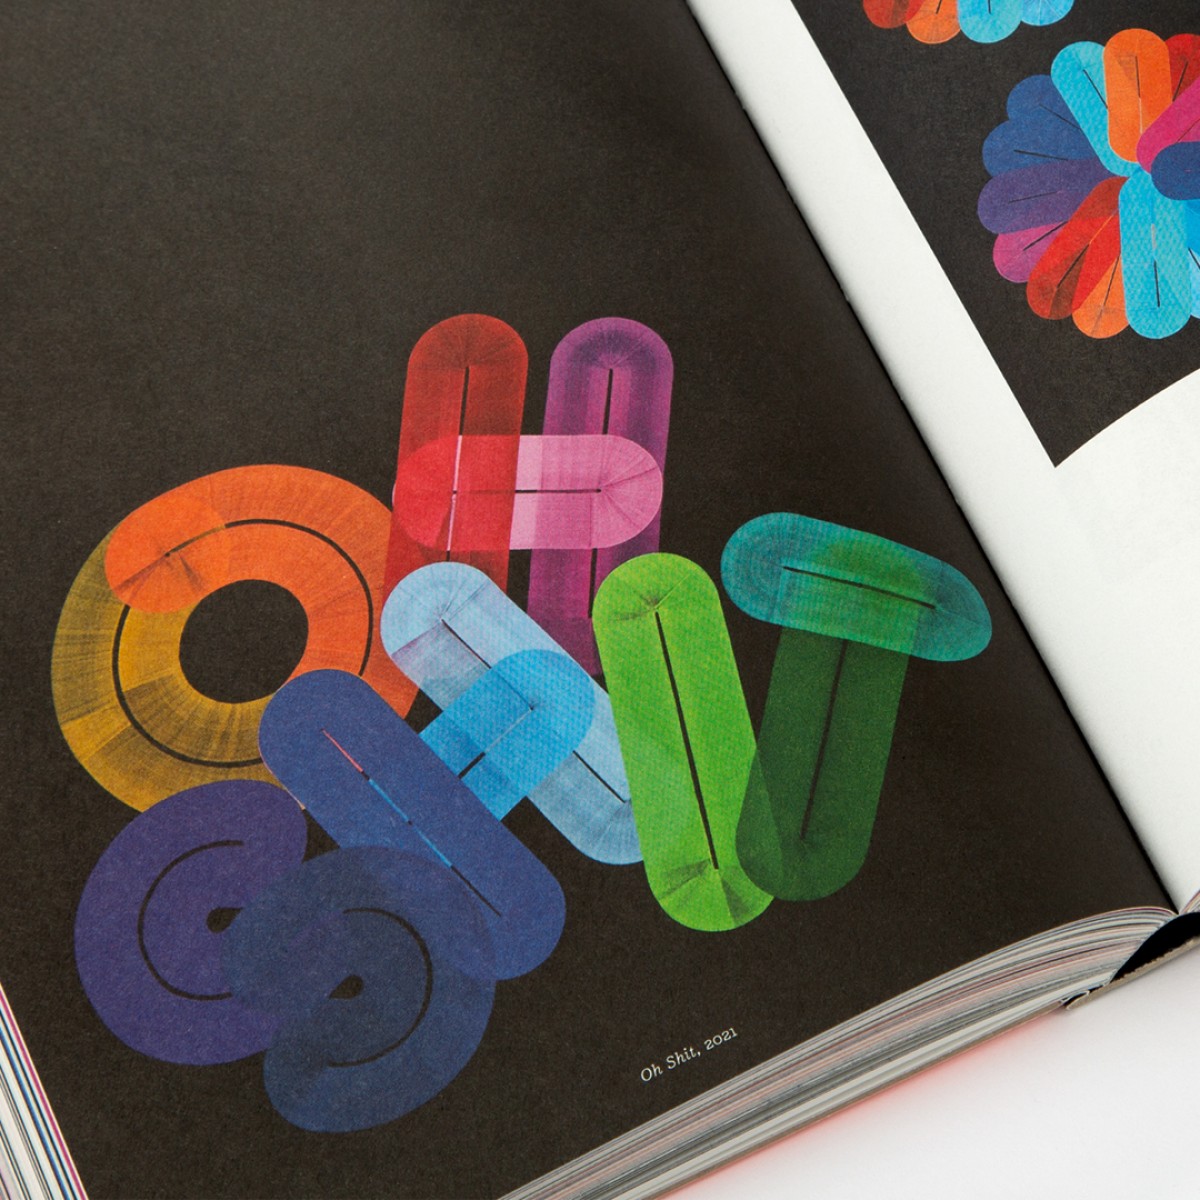 Yearbook of Lettering #1